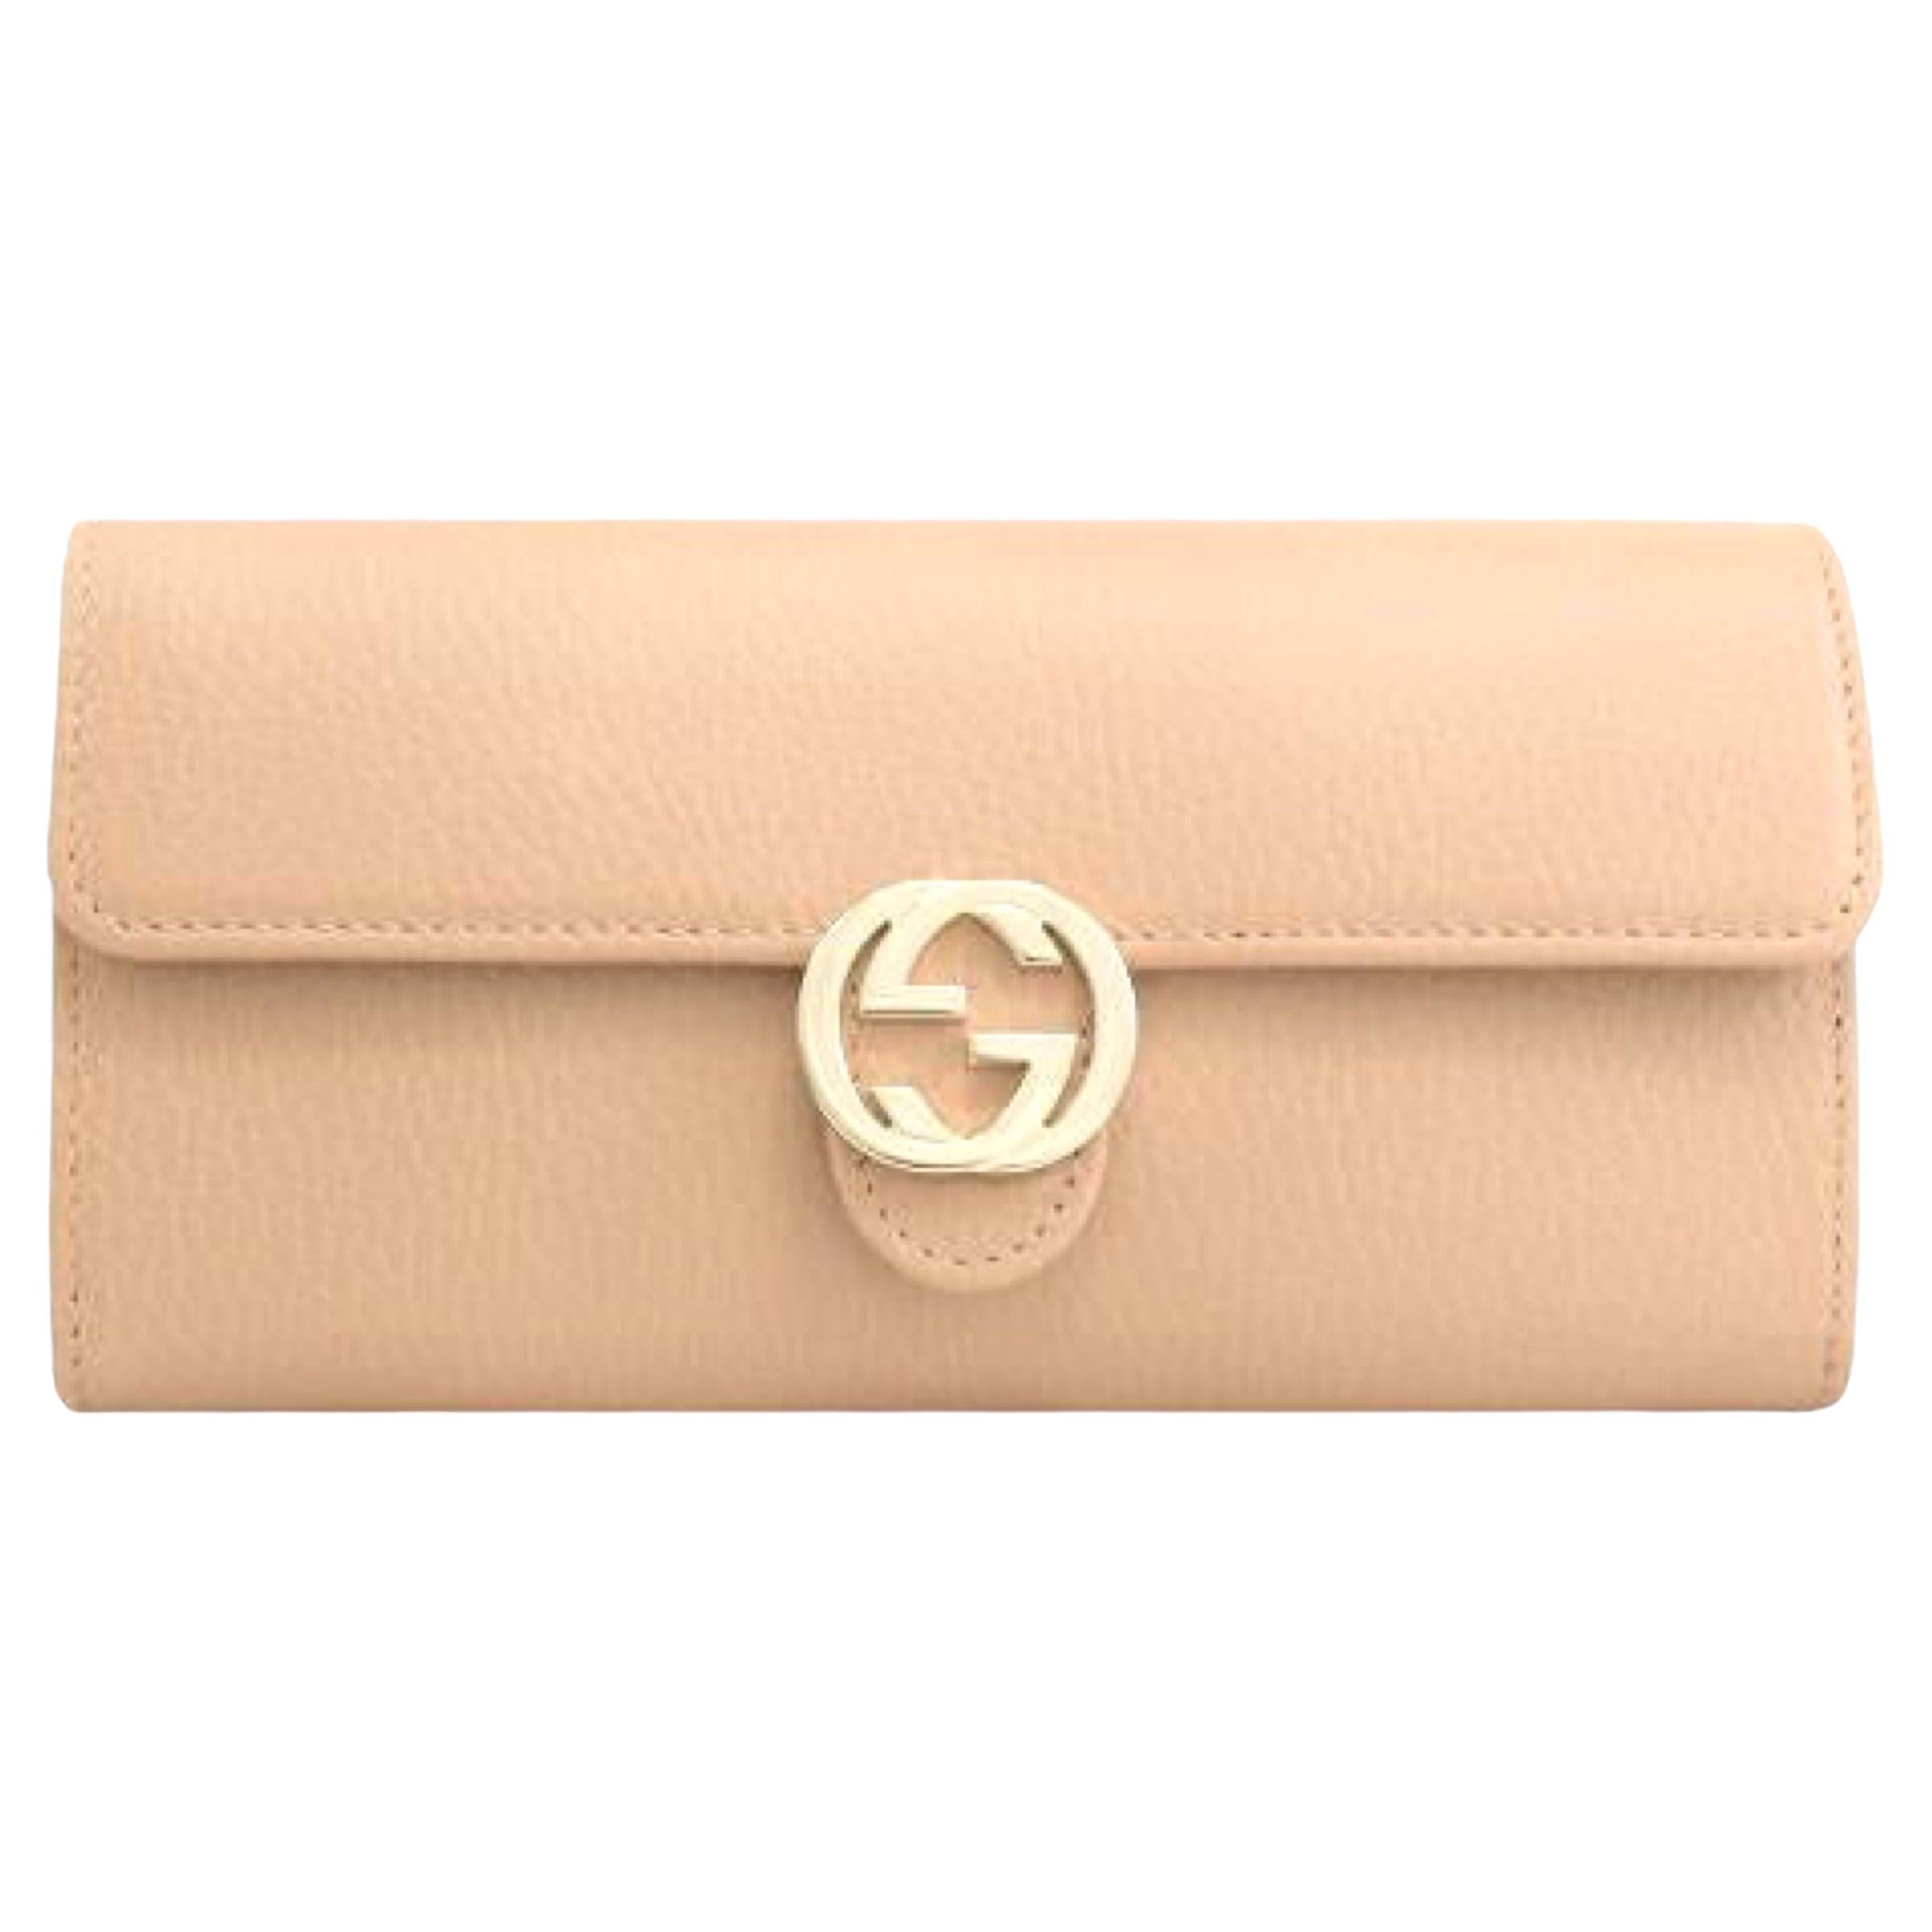 NEW Gucci Beige Interlocking G Leather Long Wallet Clutch Bag For Sale